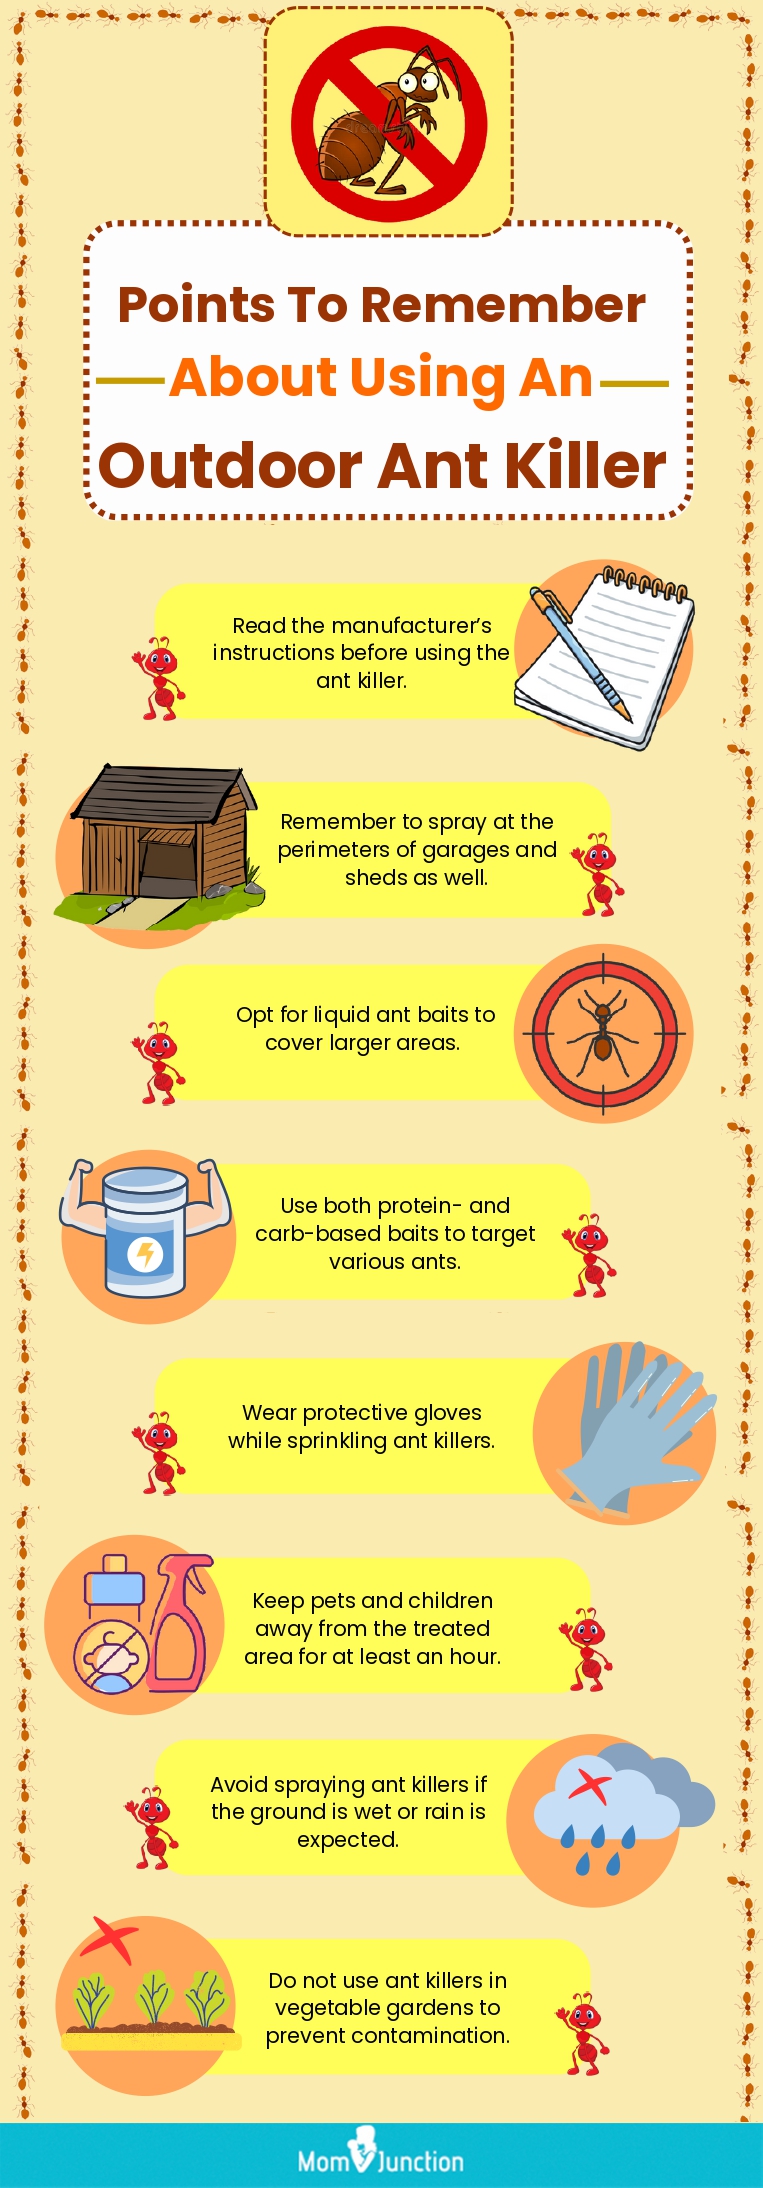 Points To Remember About Using An Outdoor Ant Killer (infographic)